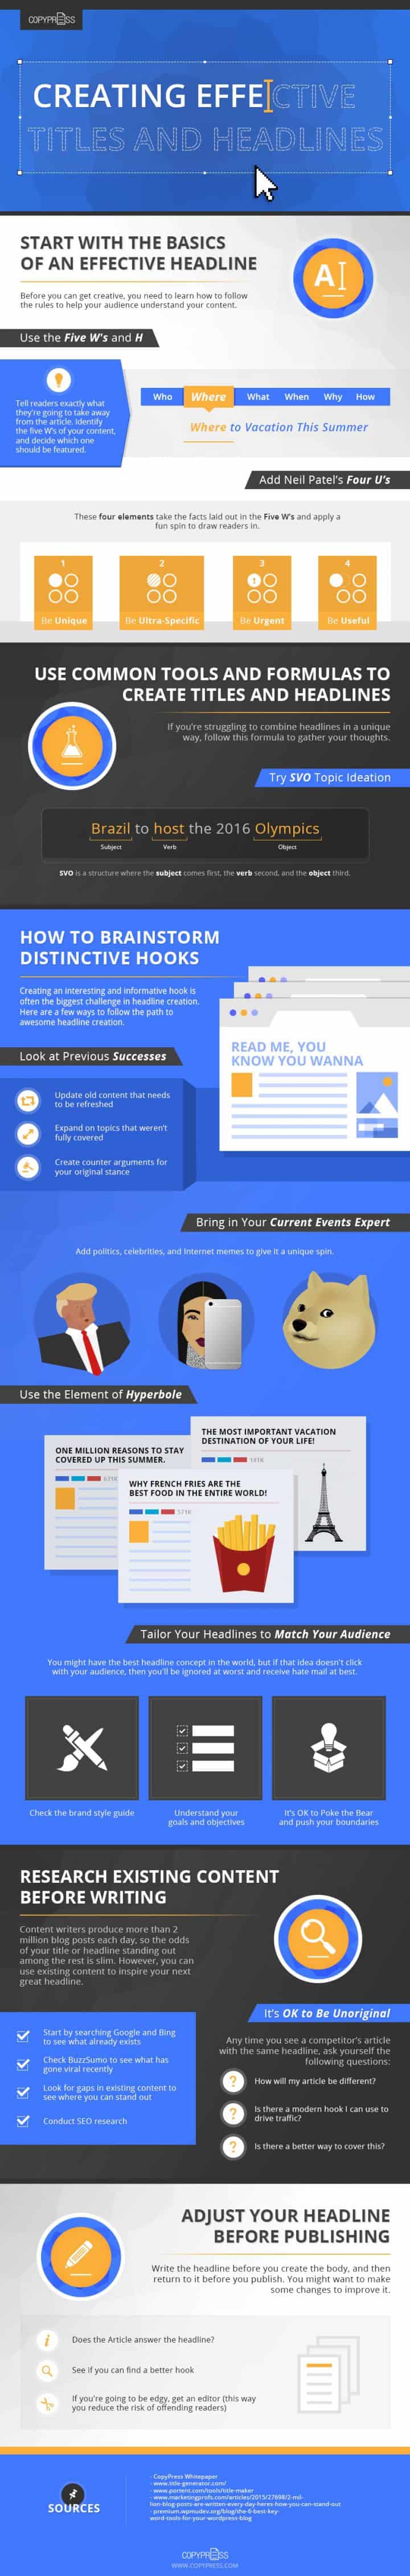 Catchy Titles effective titles infographic